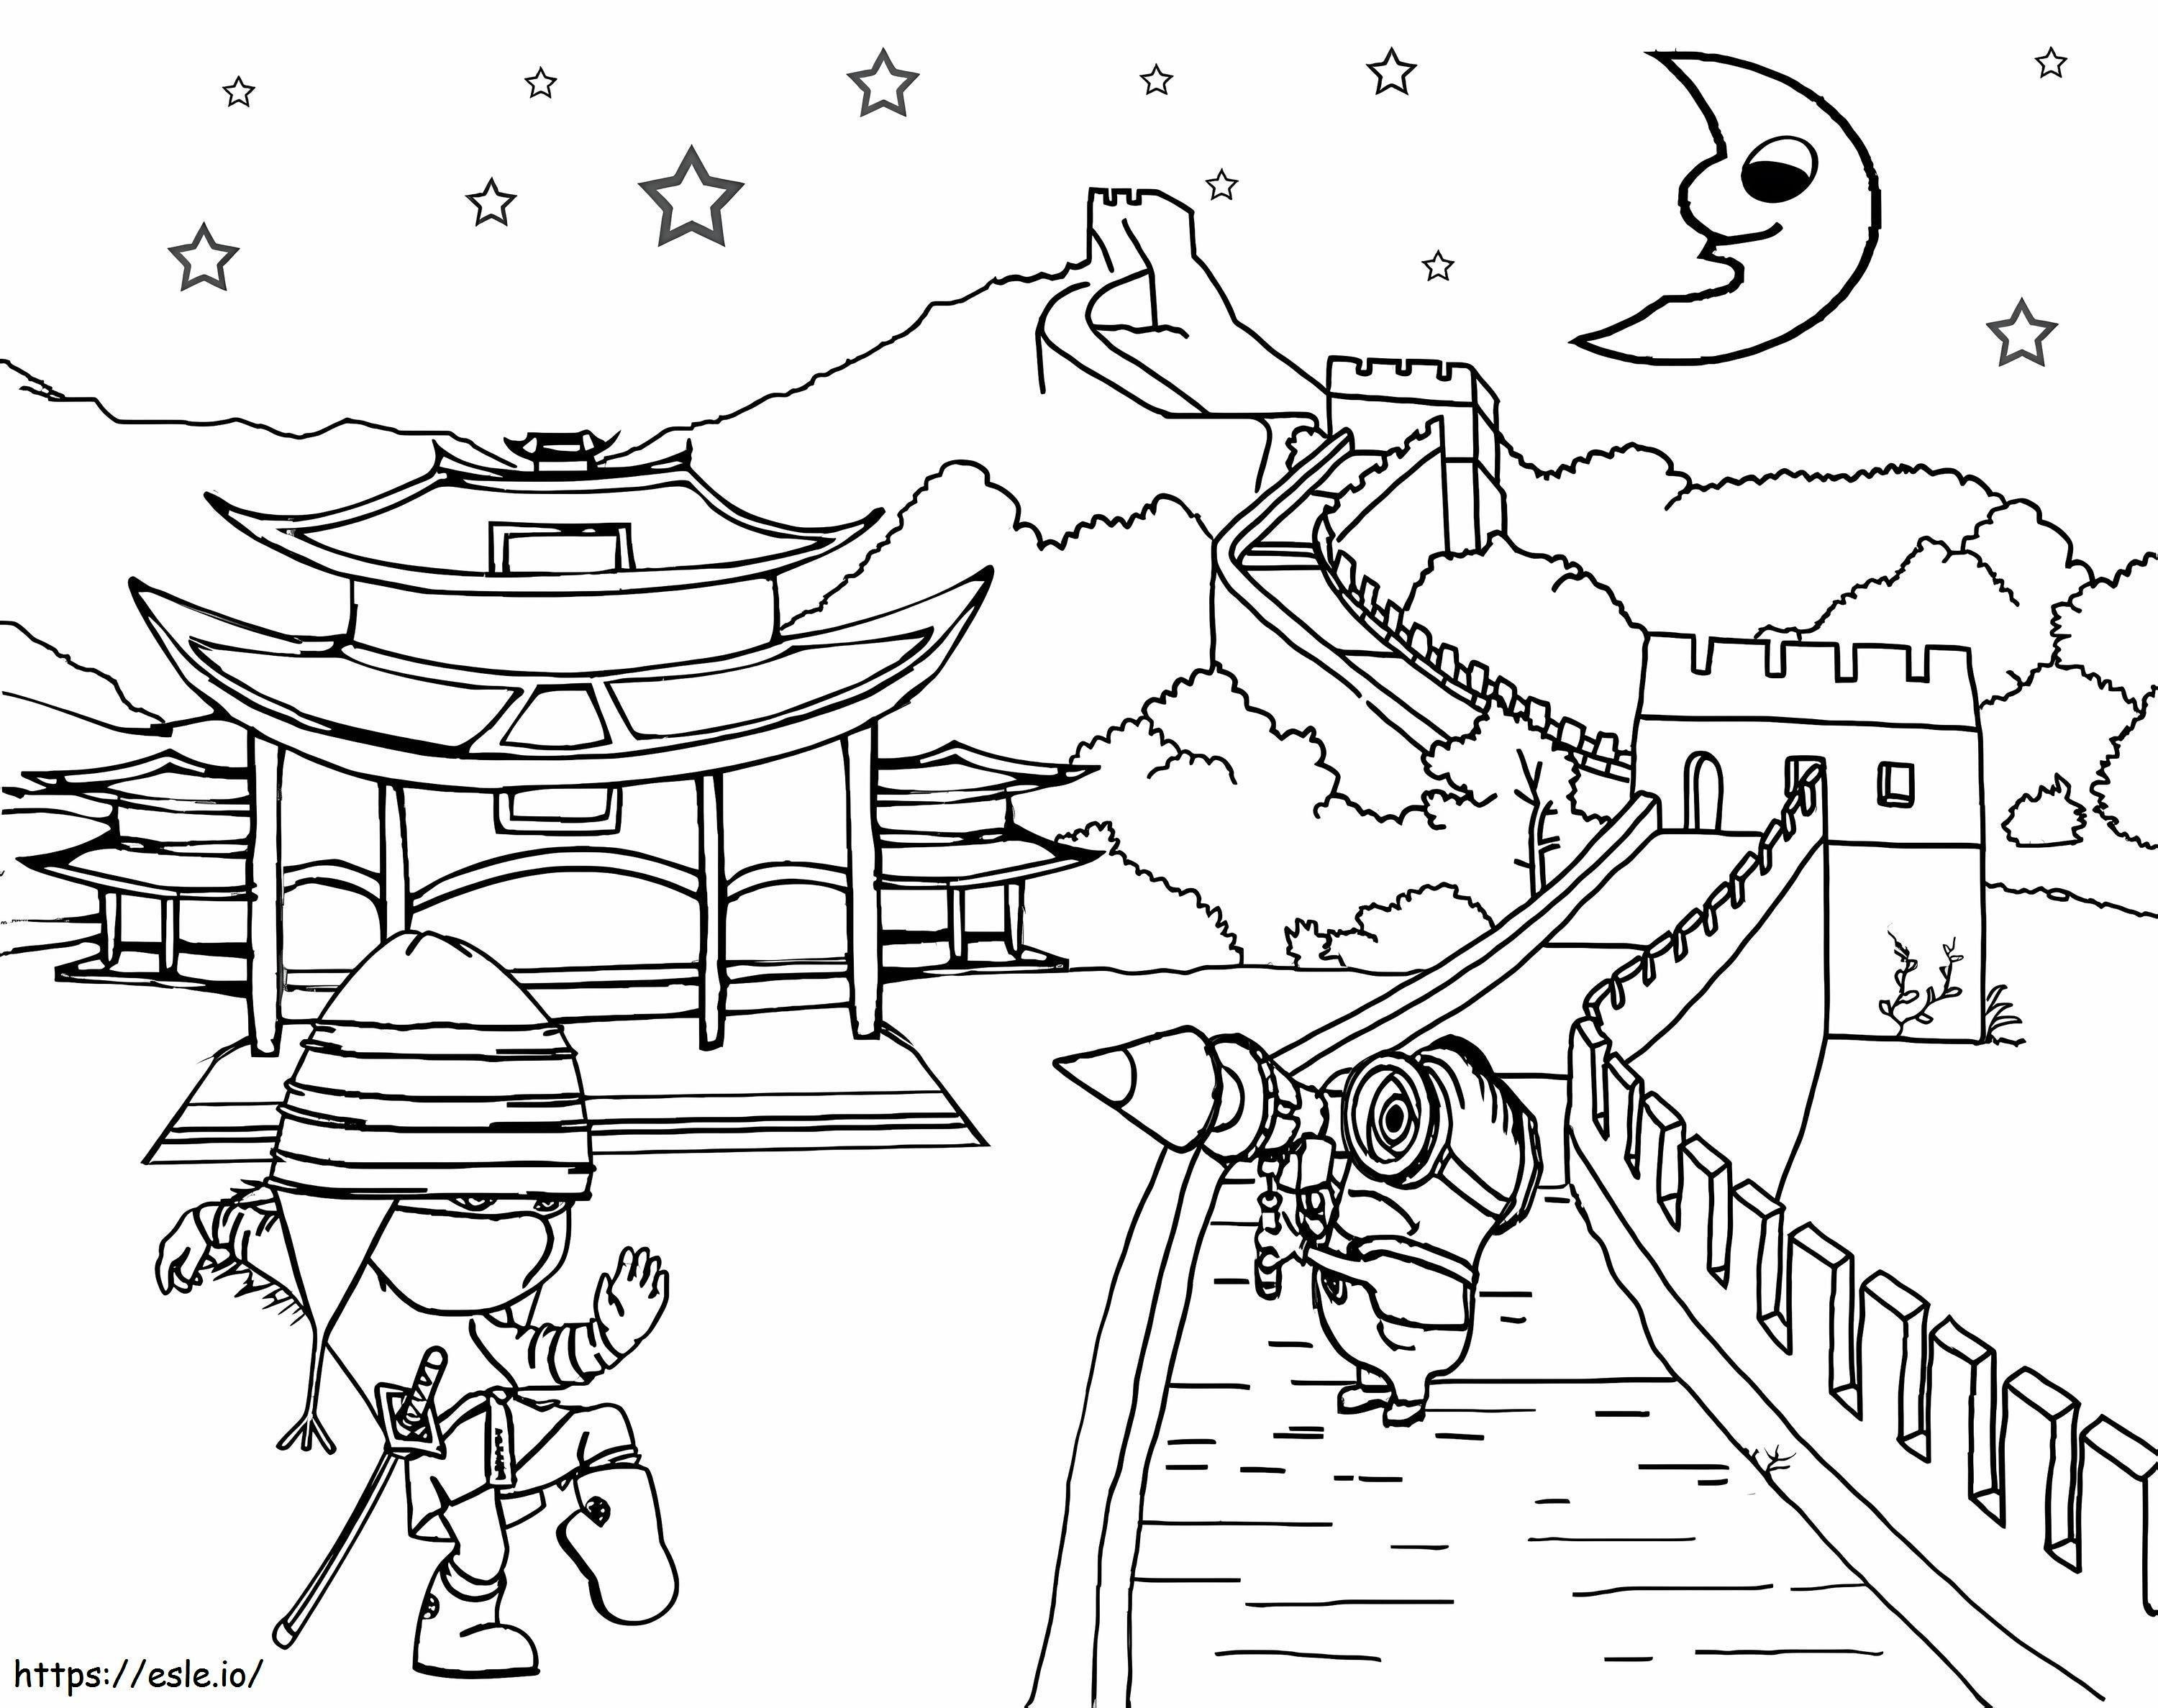 Minion On Great Wall coloring page